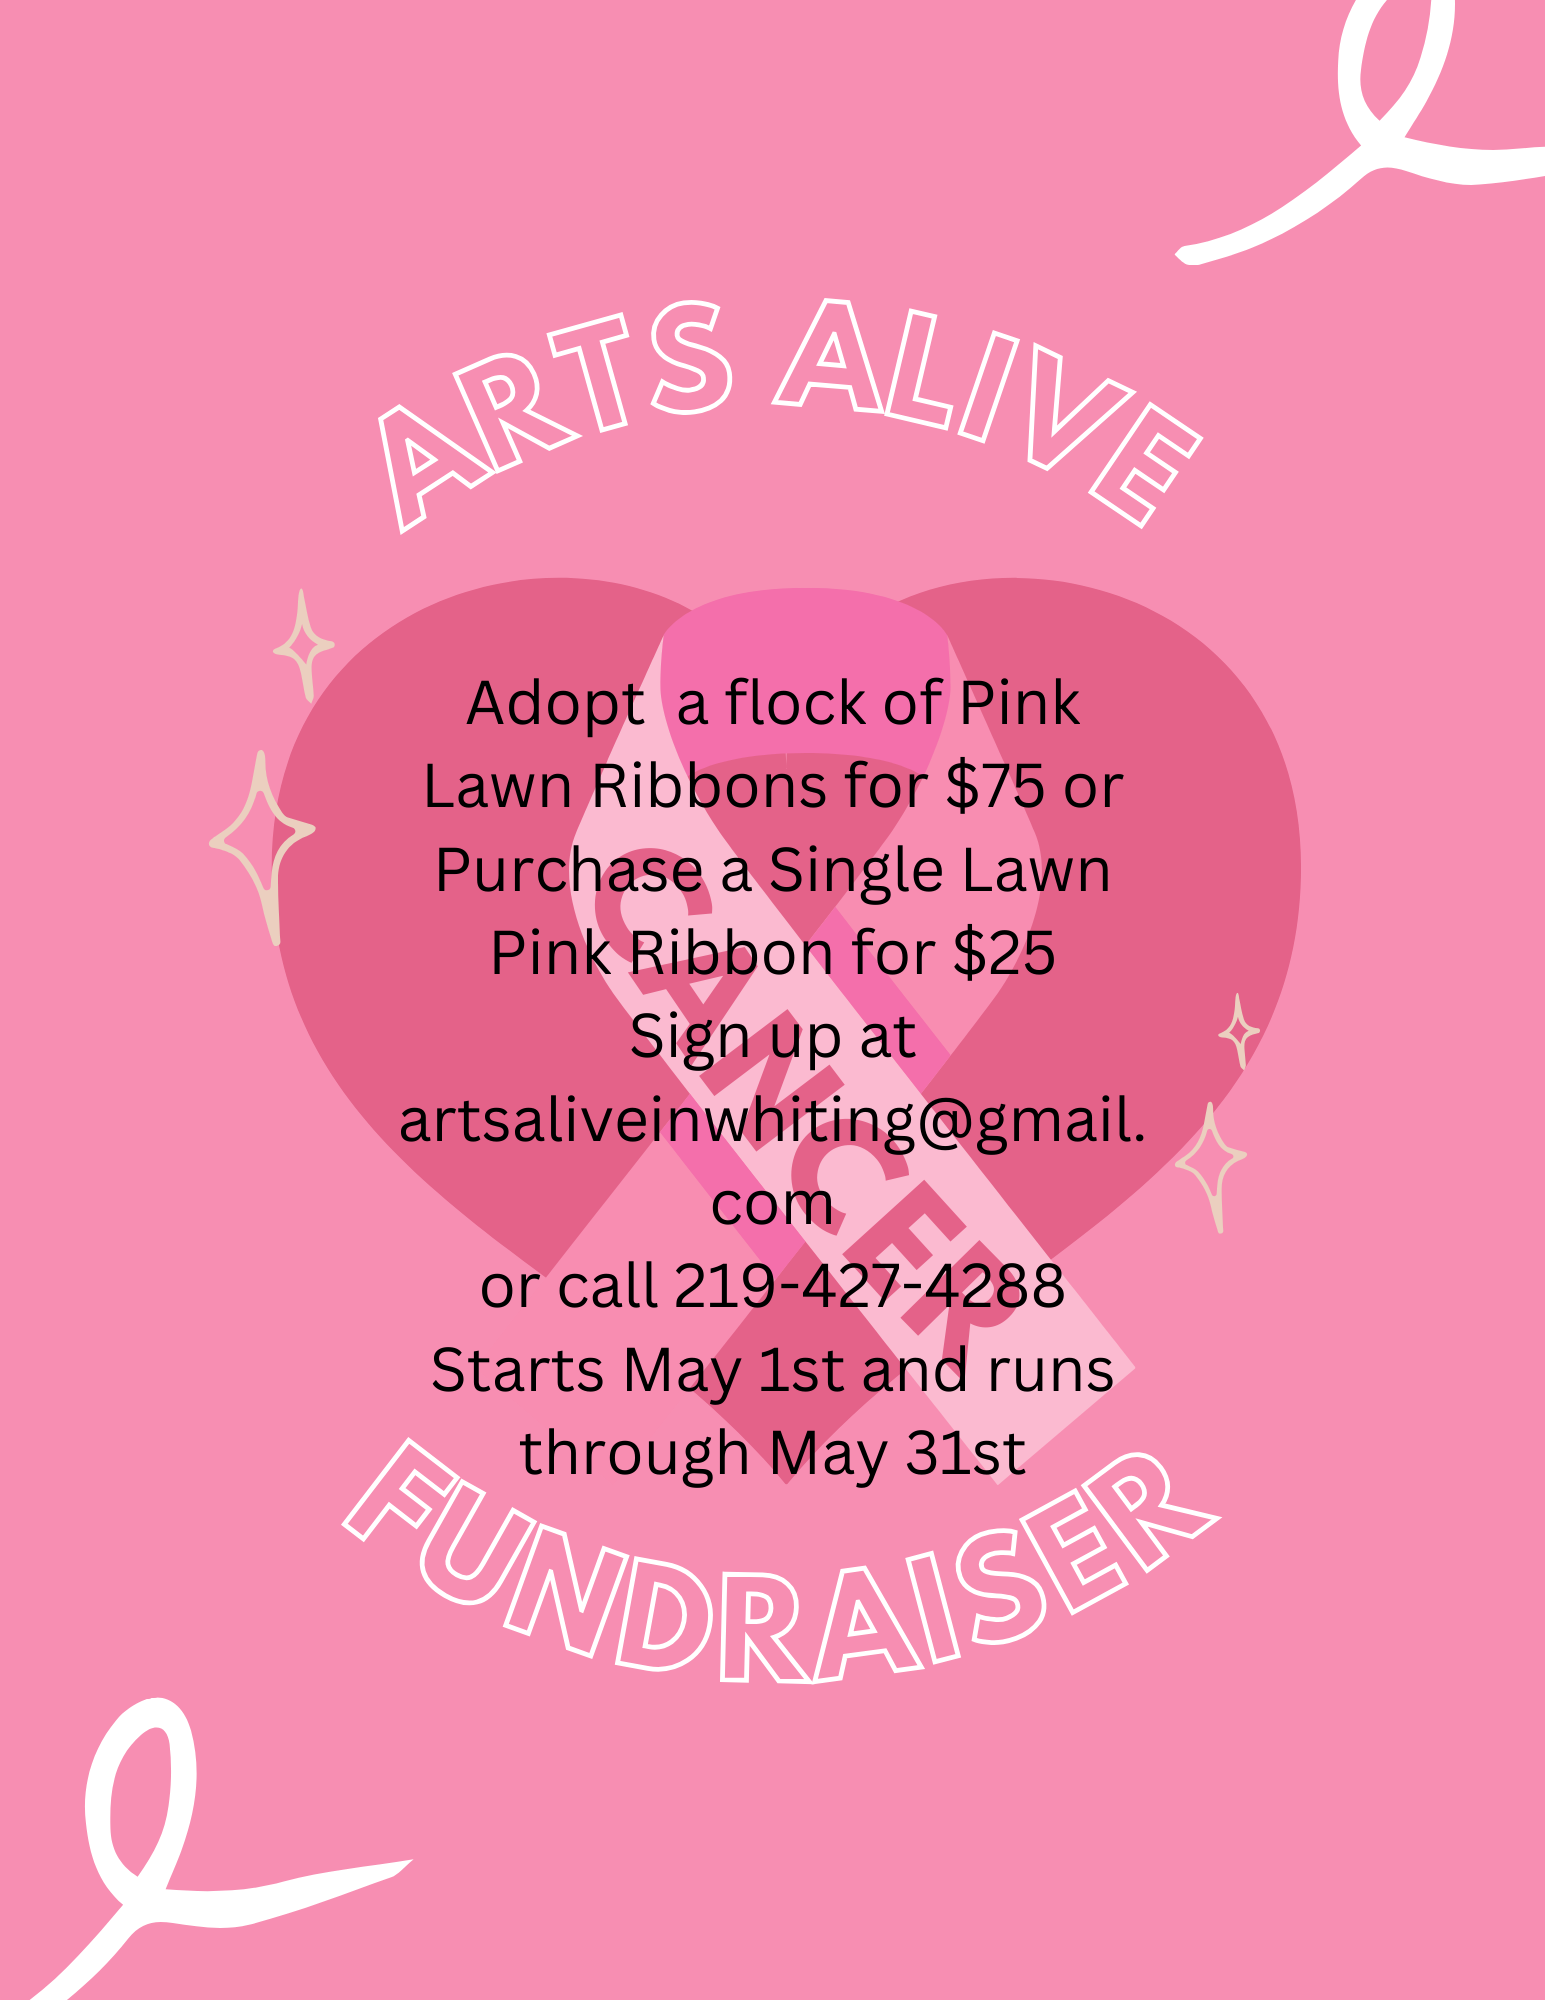 Adopt a Flock of Pink Lawn Ribbons